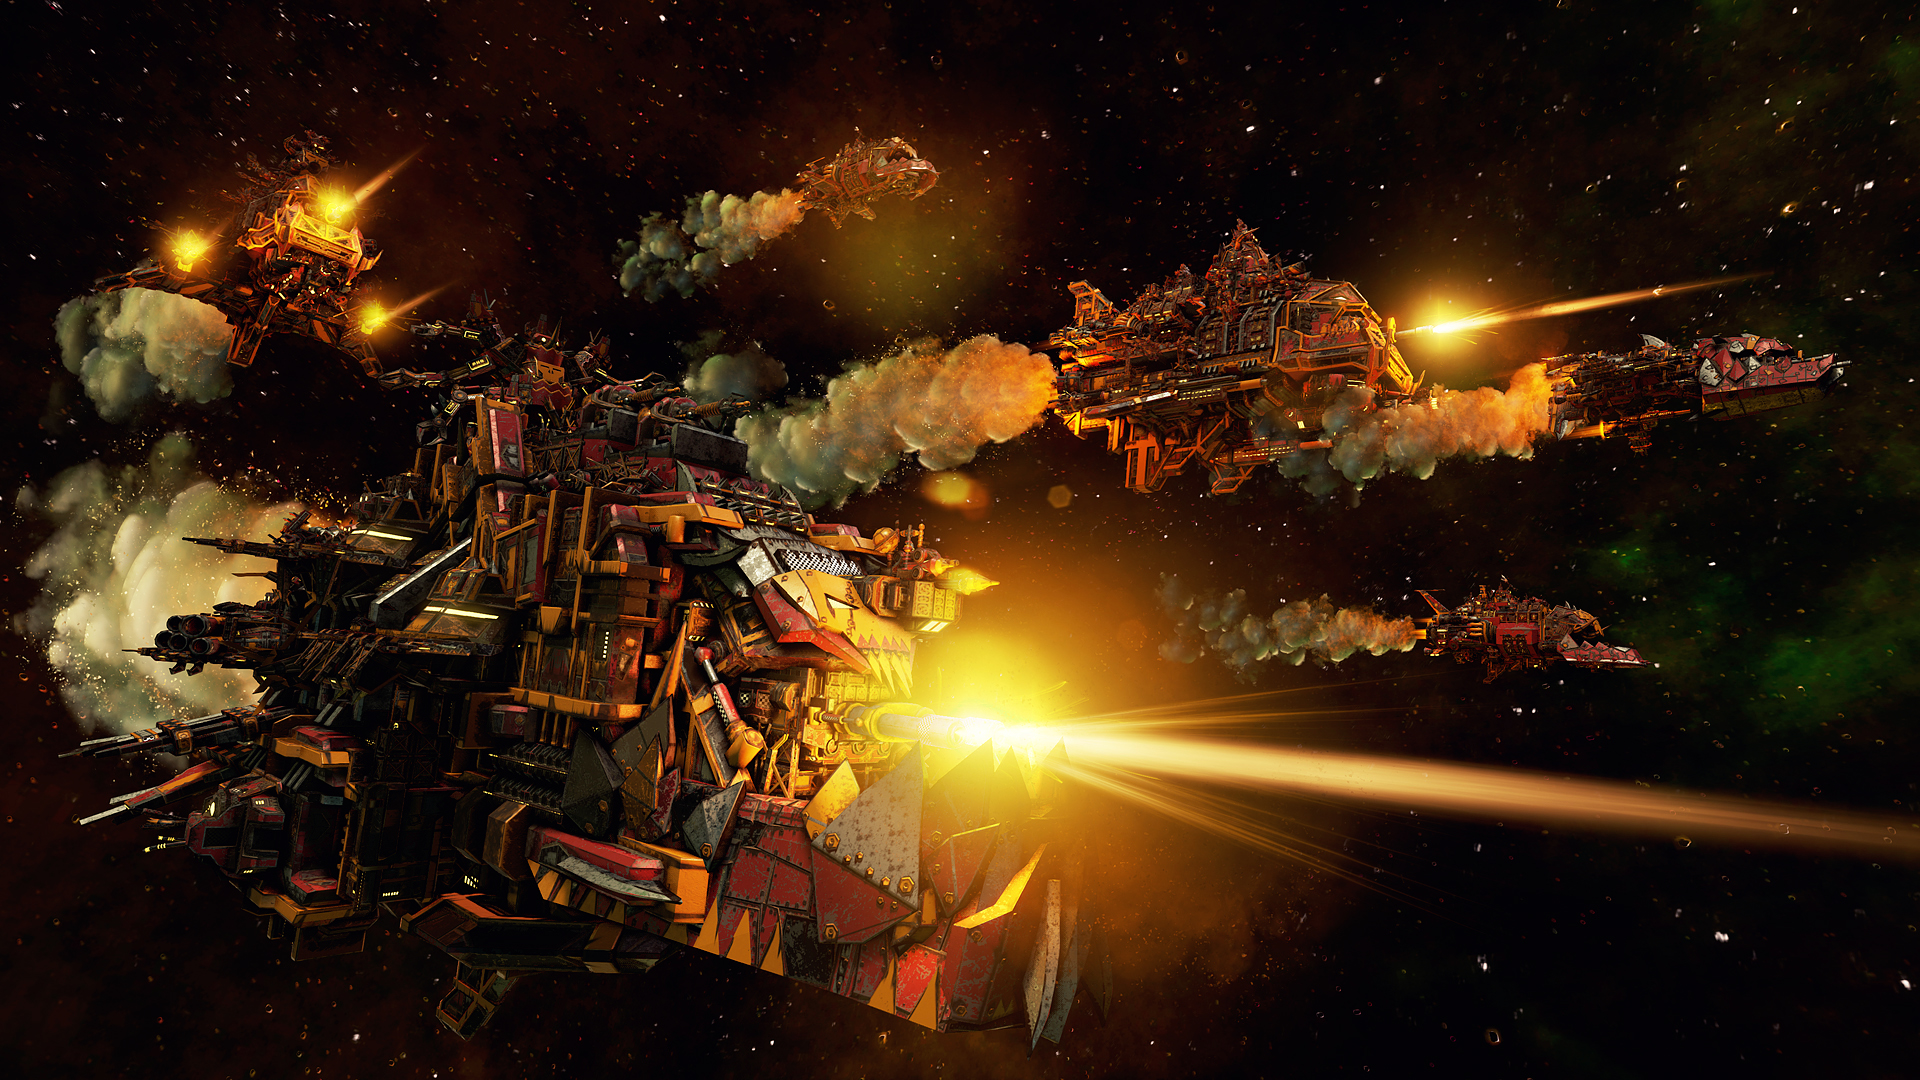 Ork ships are massive hybrids of scrap metal and firepower.